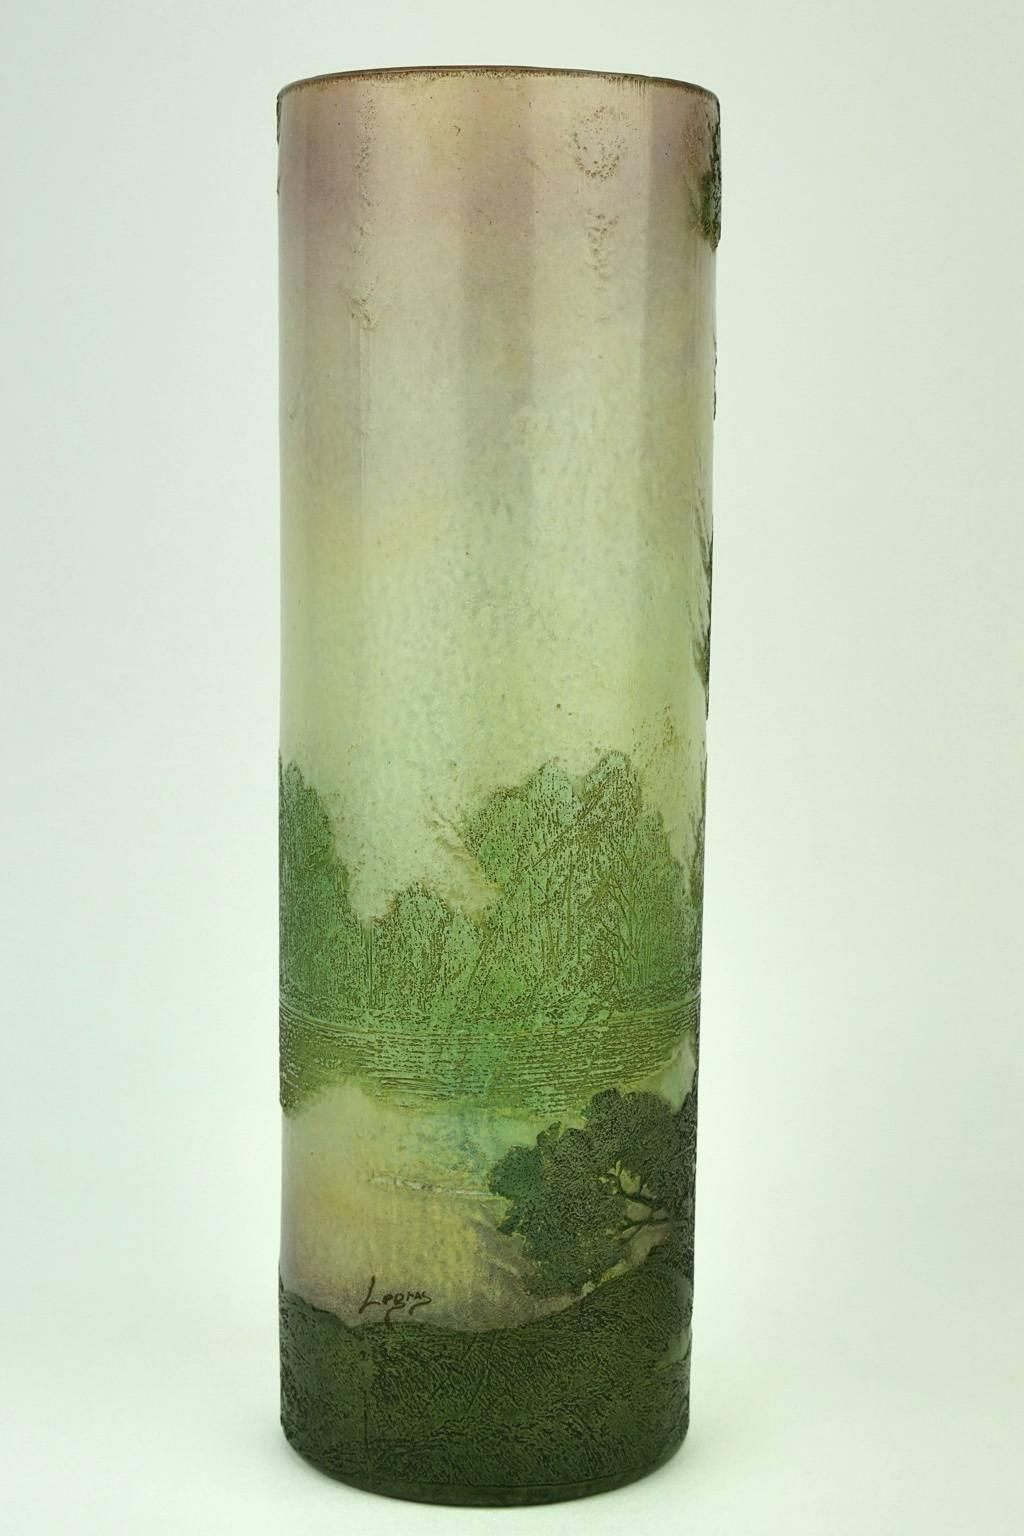 This Art Nouveau cameo vase by Legras features a landscape of pines around a lake in a clearly Japanese style.
The vase is signed Legras.